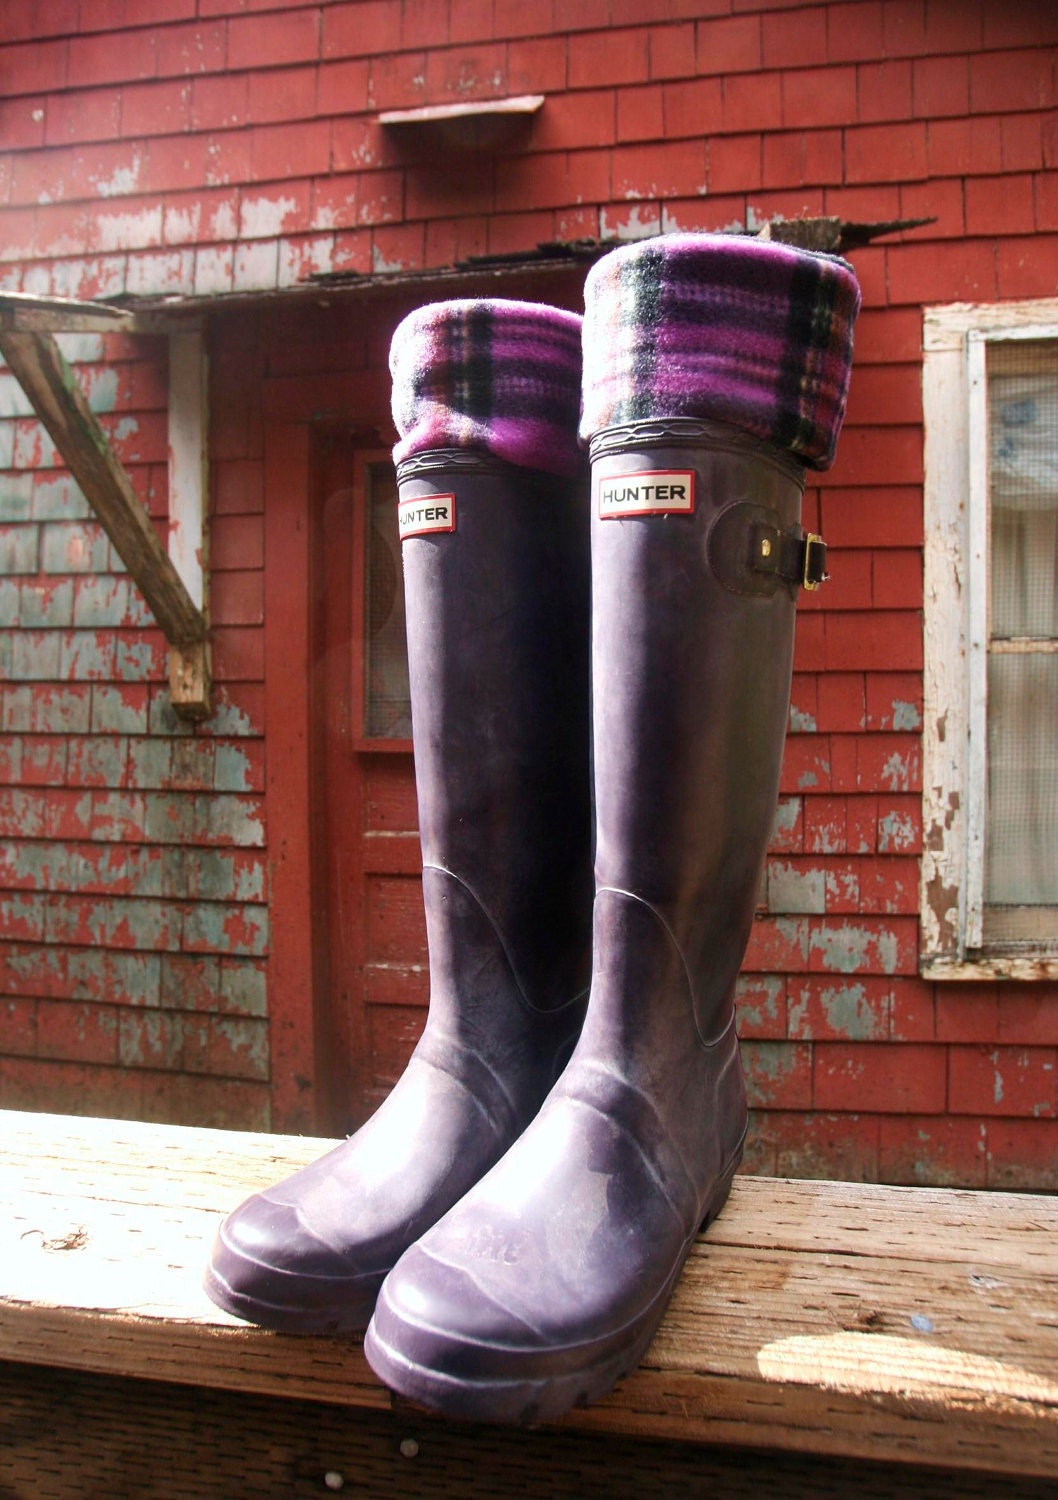 SLUGS Fleece Rain Boot Liners Black with a Purple Plaid Cuff, Camping Style. Rainy Day Style (Med/Lg 9-11 Boot) - WithTheRain